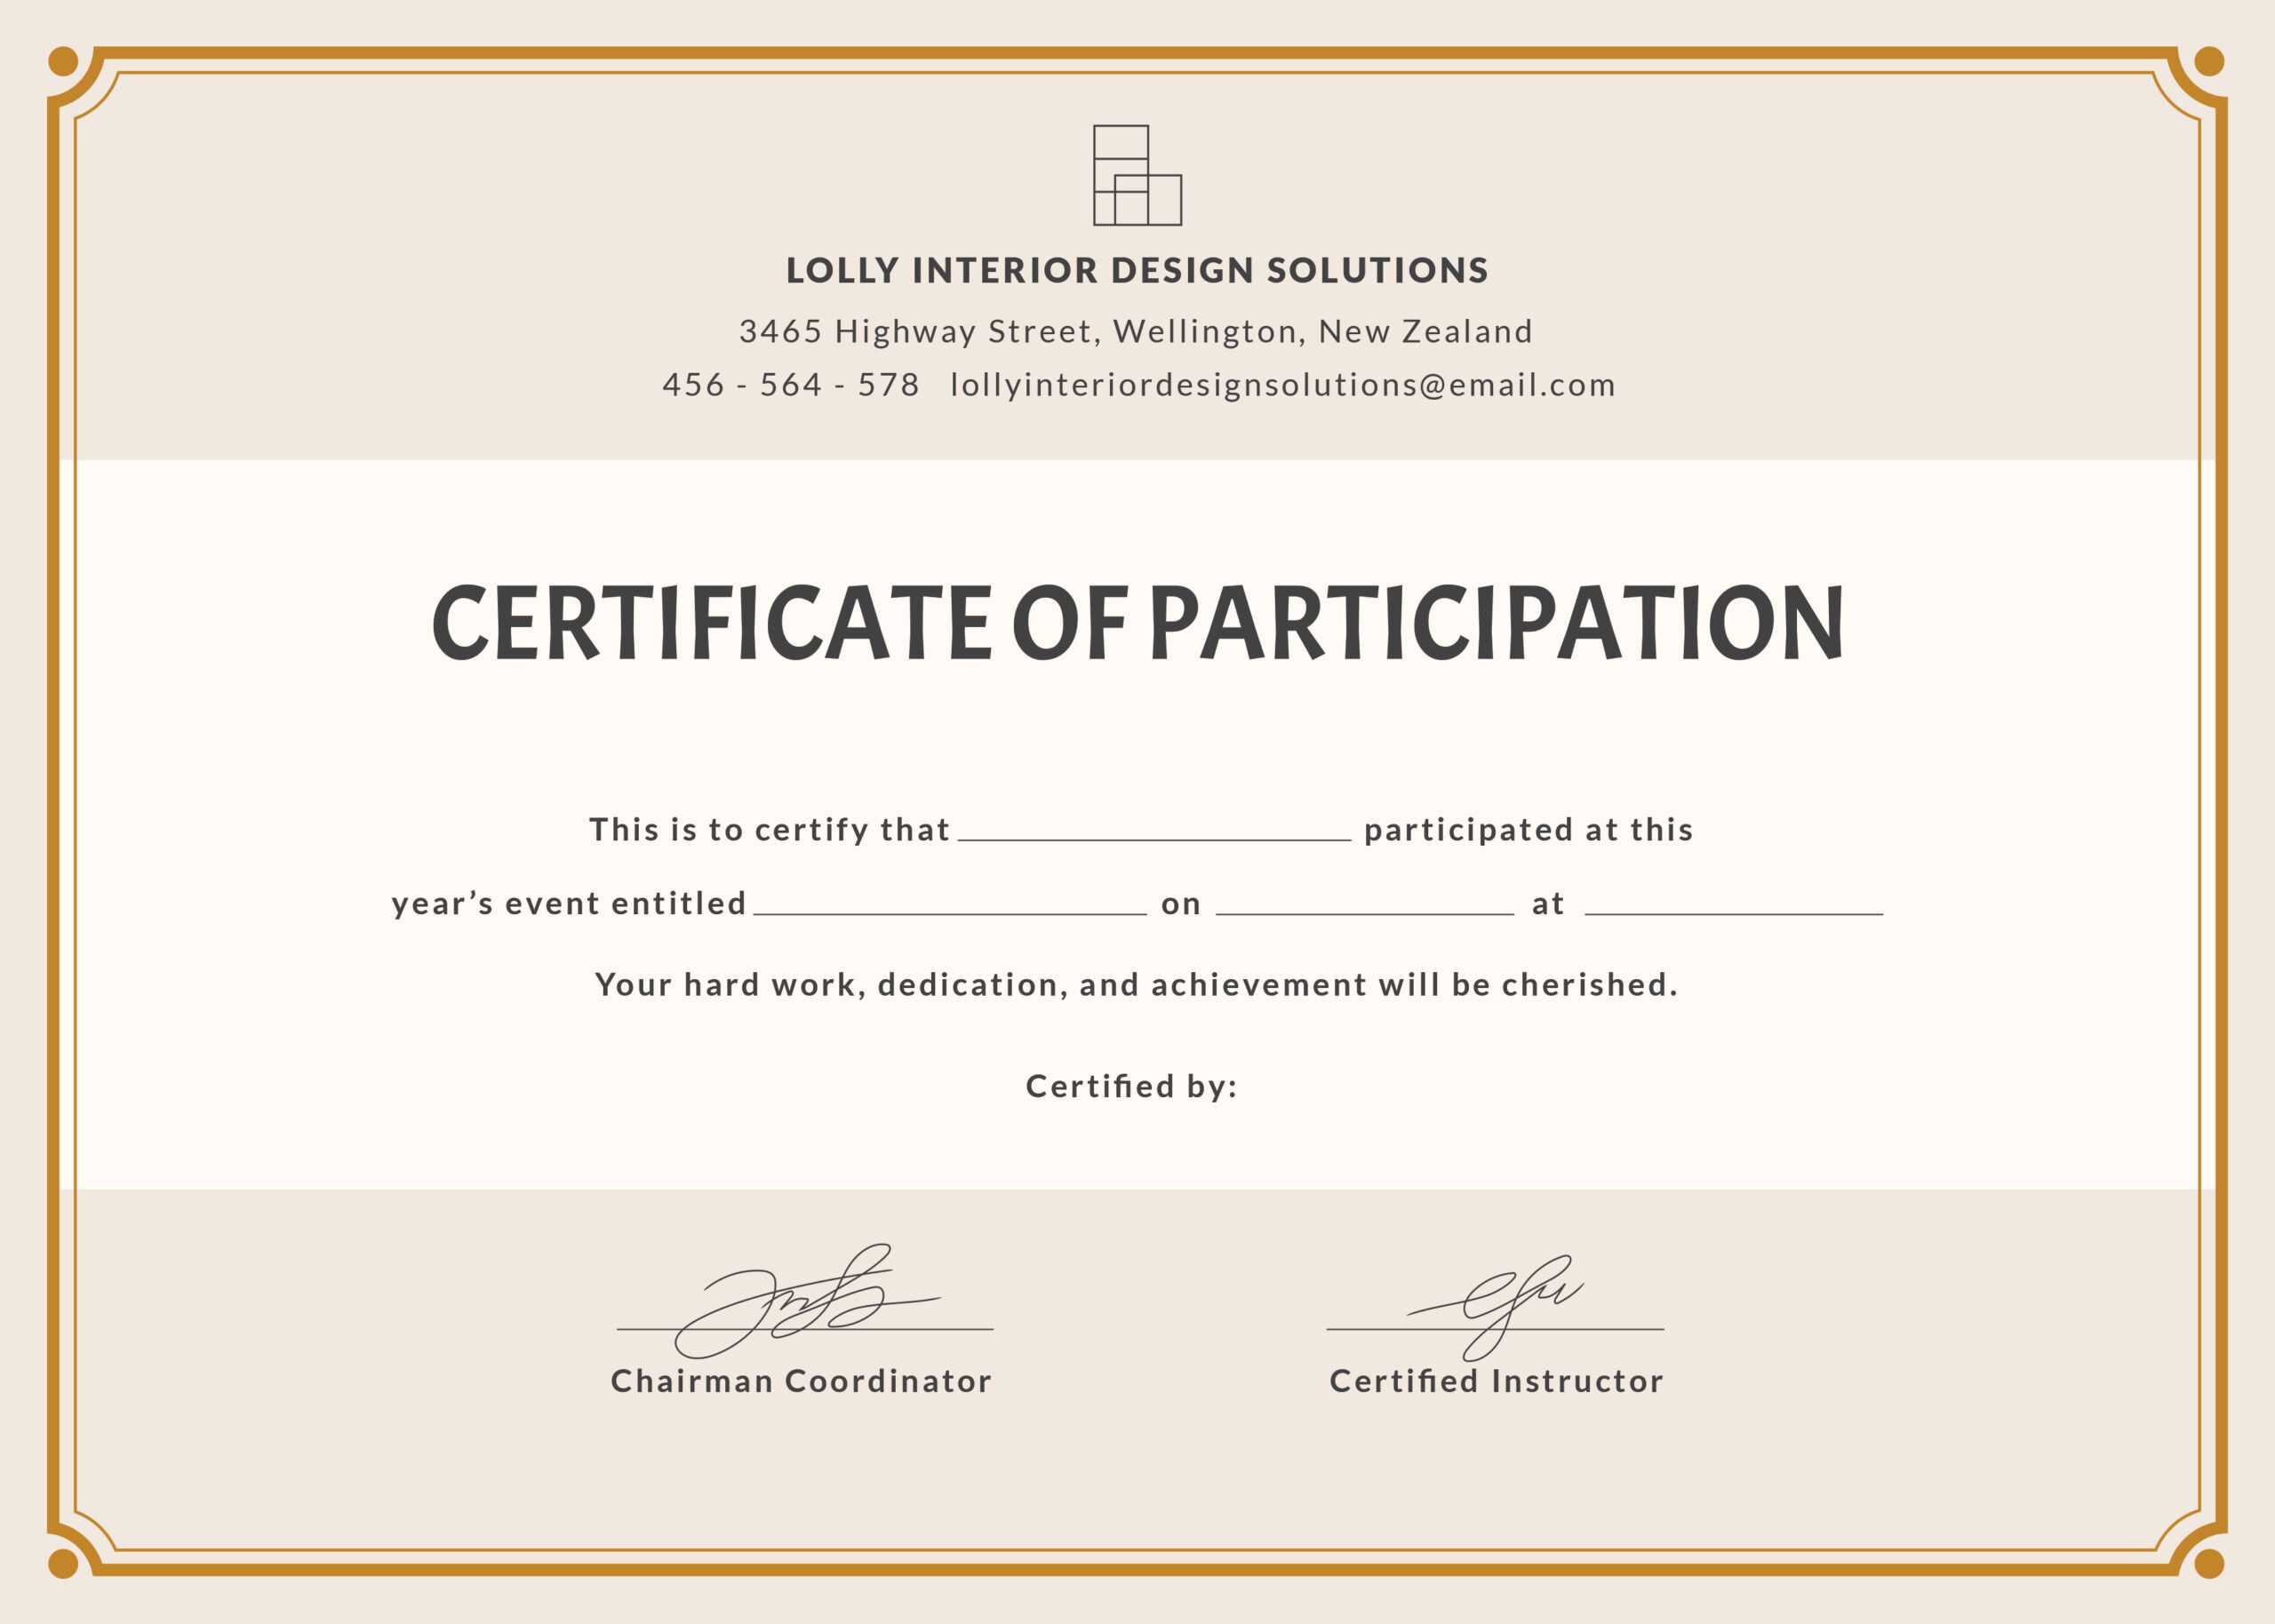 Templates For Certificates Of Participation - Calep In Templates For Certificates Of Participation